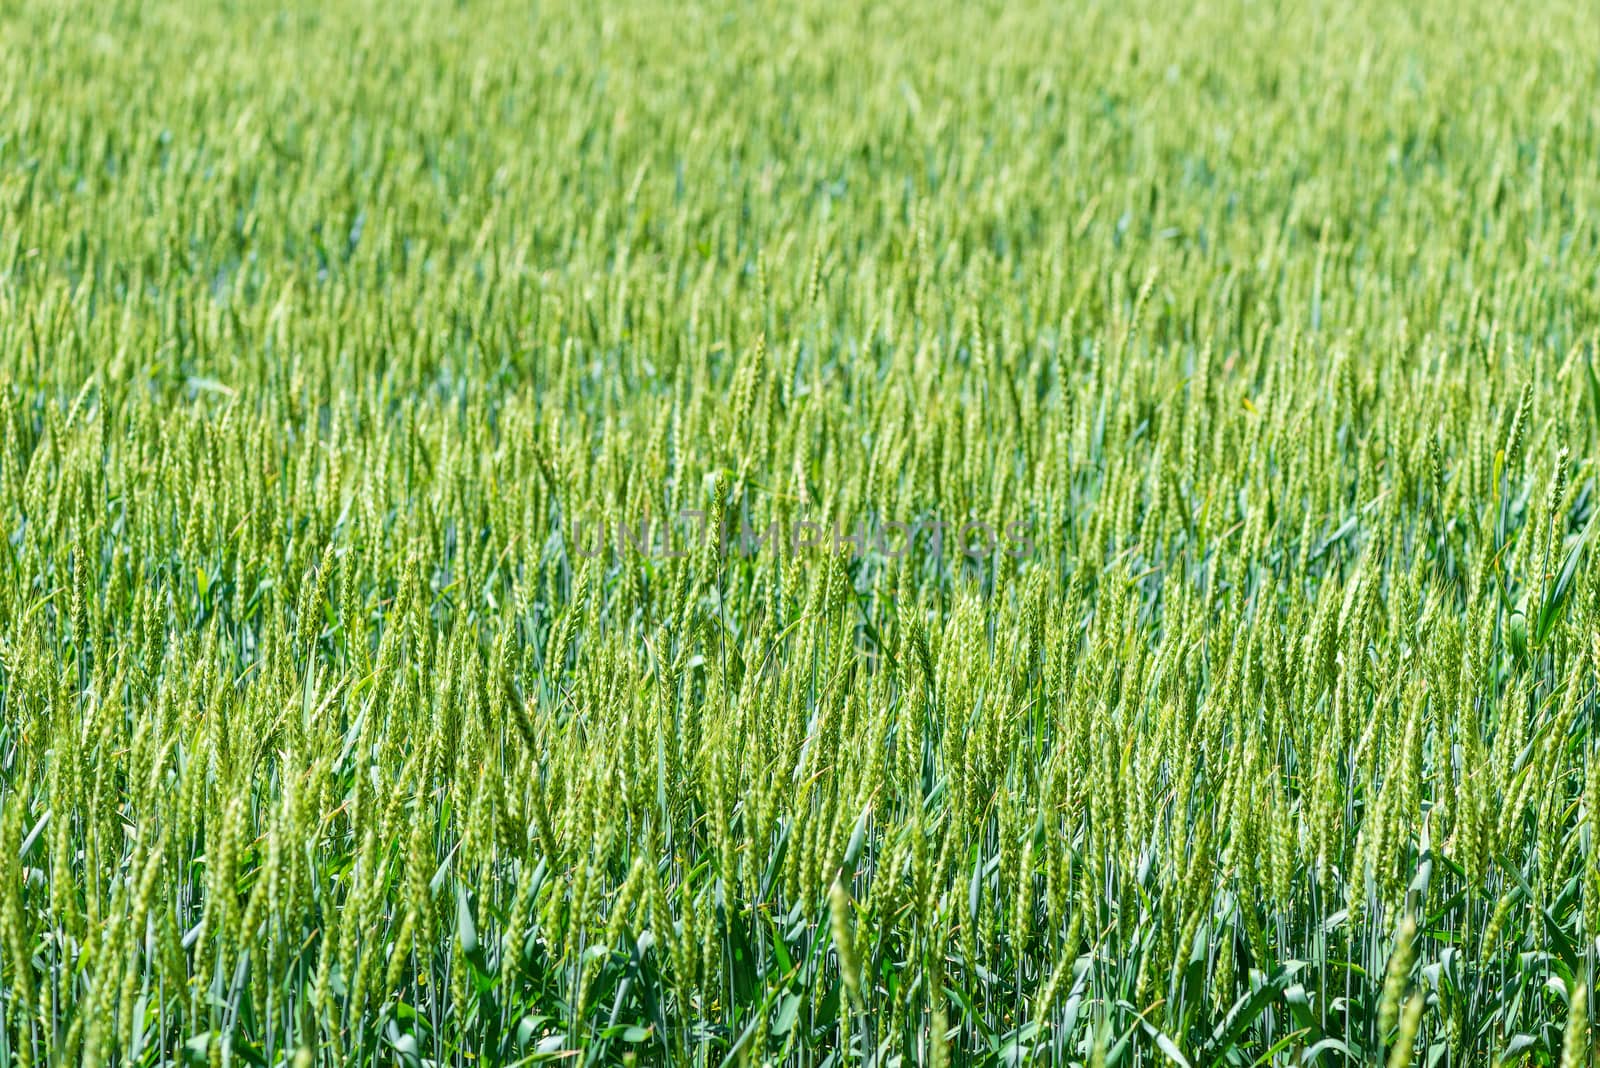 Green cereal crops spikes in a field